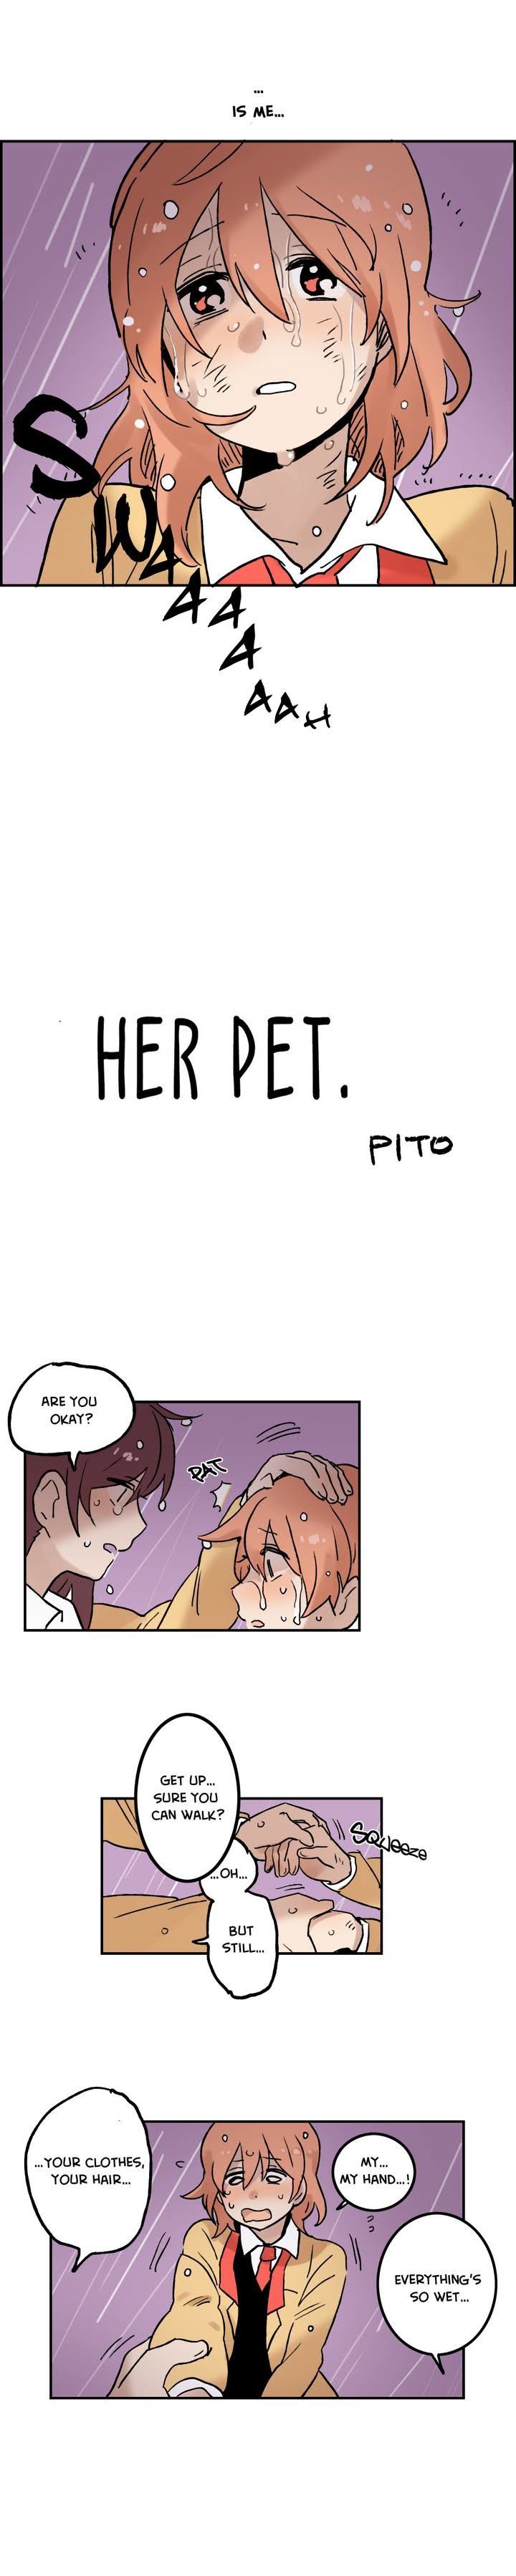 Her Pet - Chapter 1 Page 3